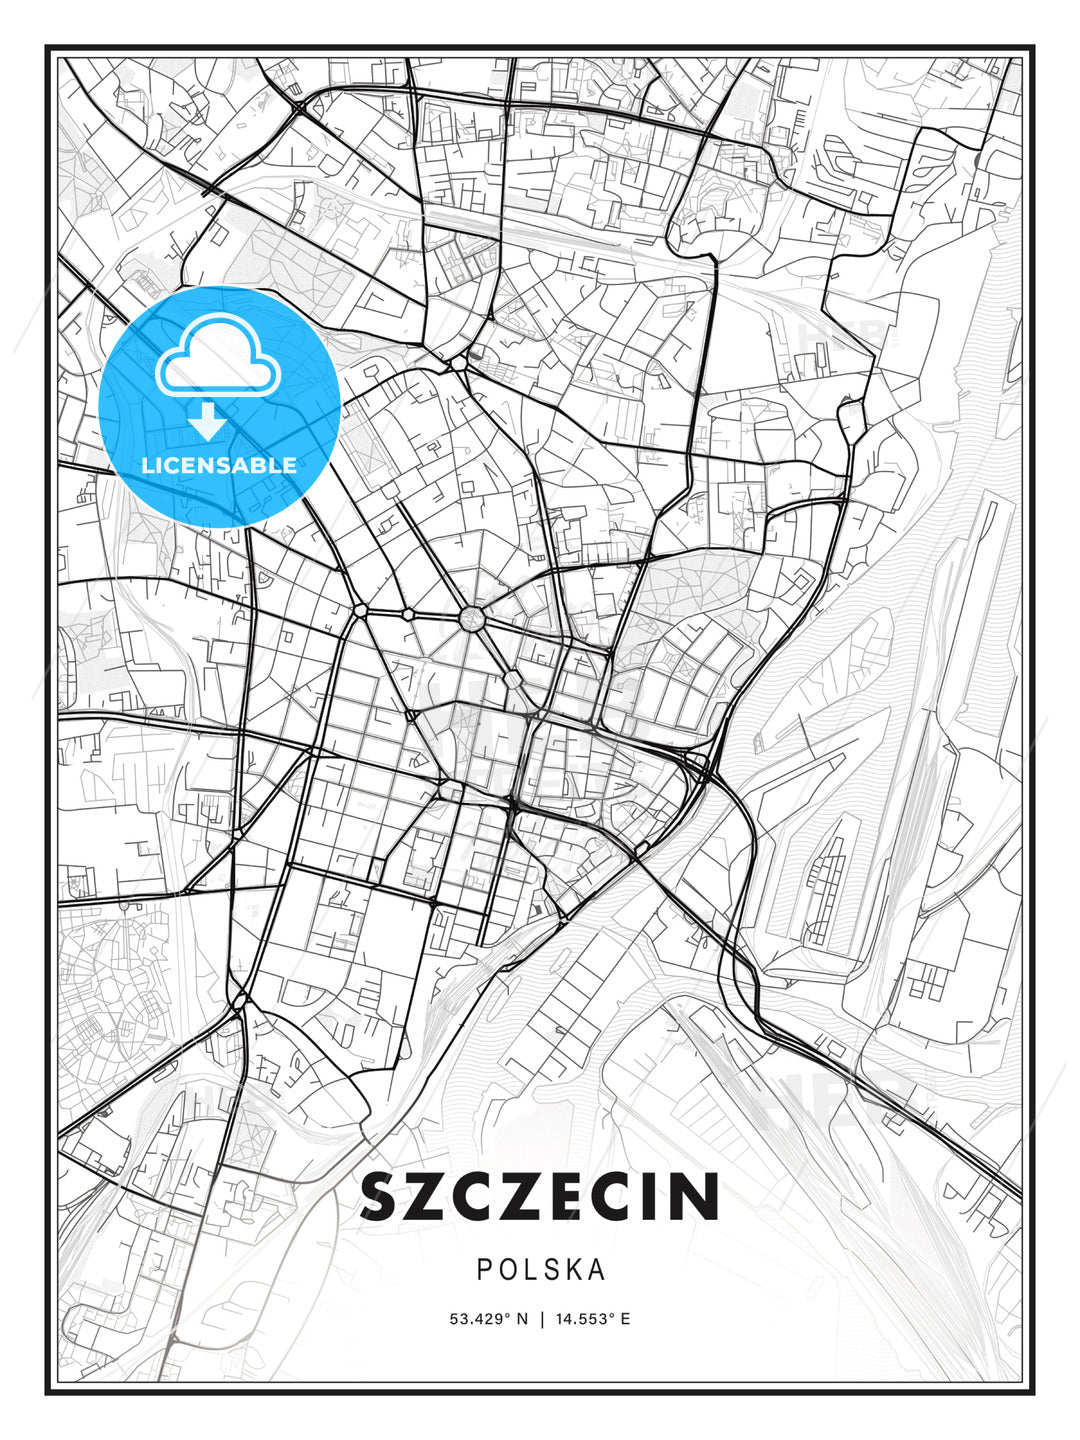 Szczecin, Poland, Modern Print Template in Various Formats - HEBSTREITS Sketches